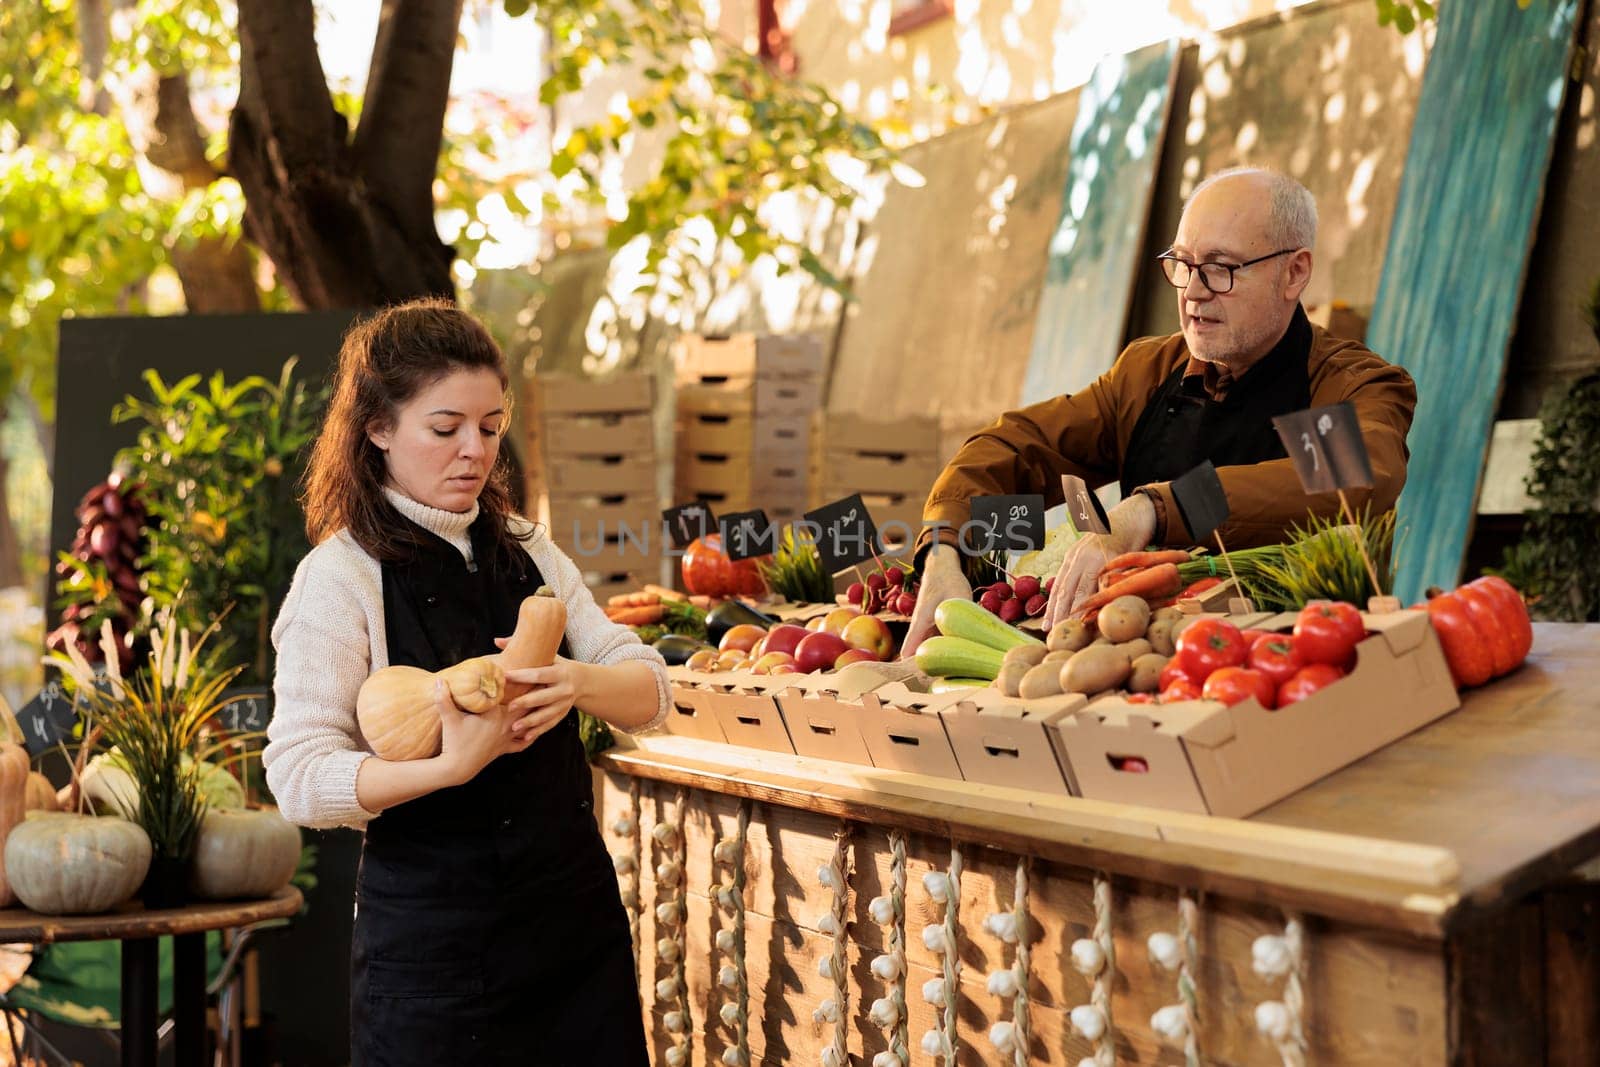 Local stand vendors starting the day with fresh natural produce, working at marketplace stall to sell healthy products. Young woman putting fruits and vegetables on farmers market.